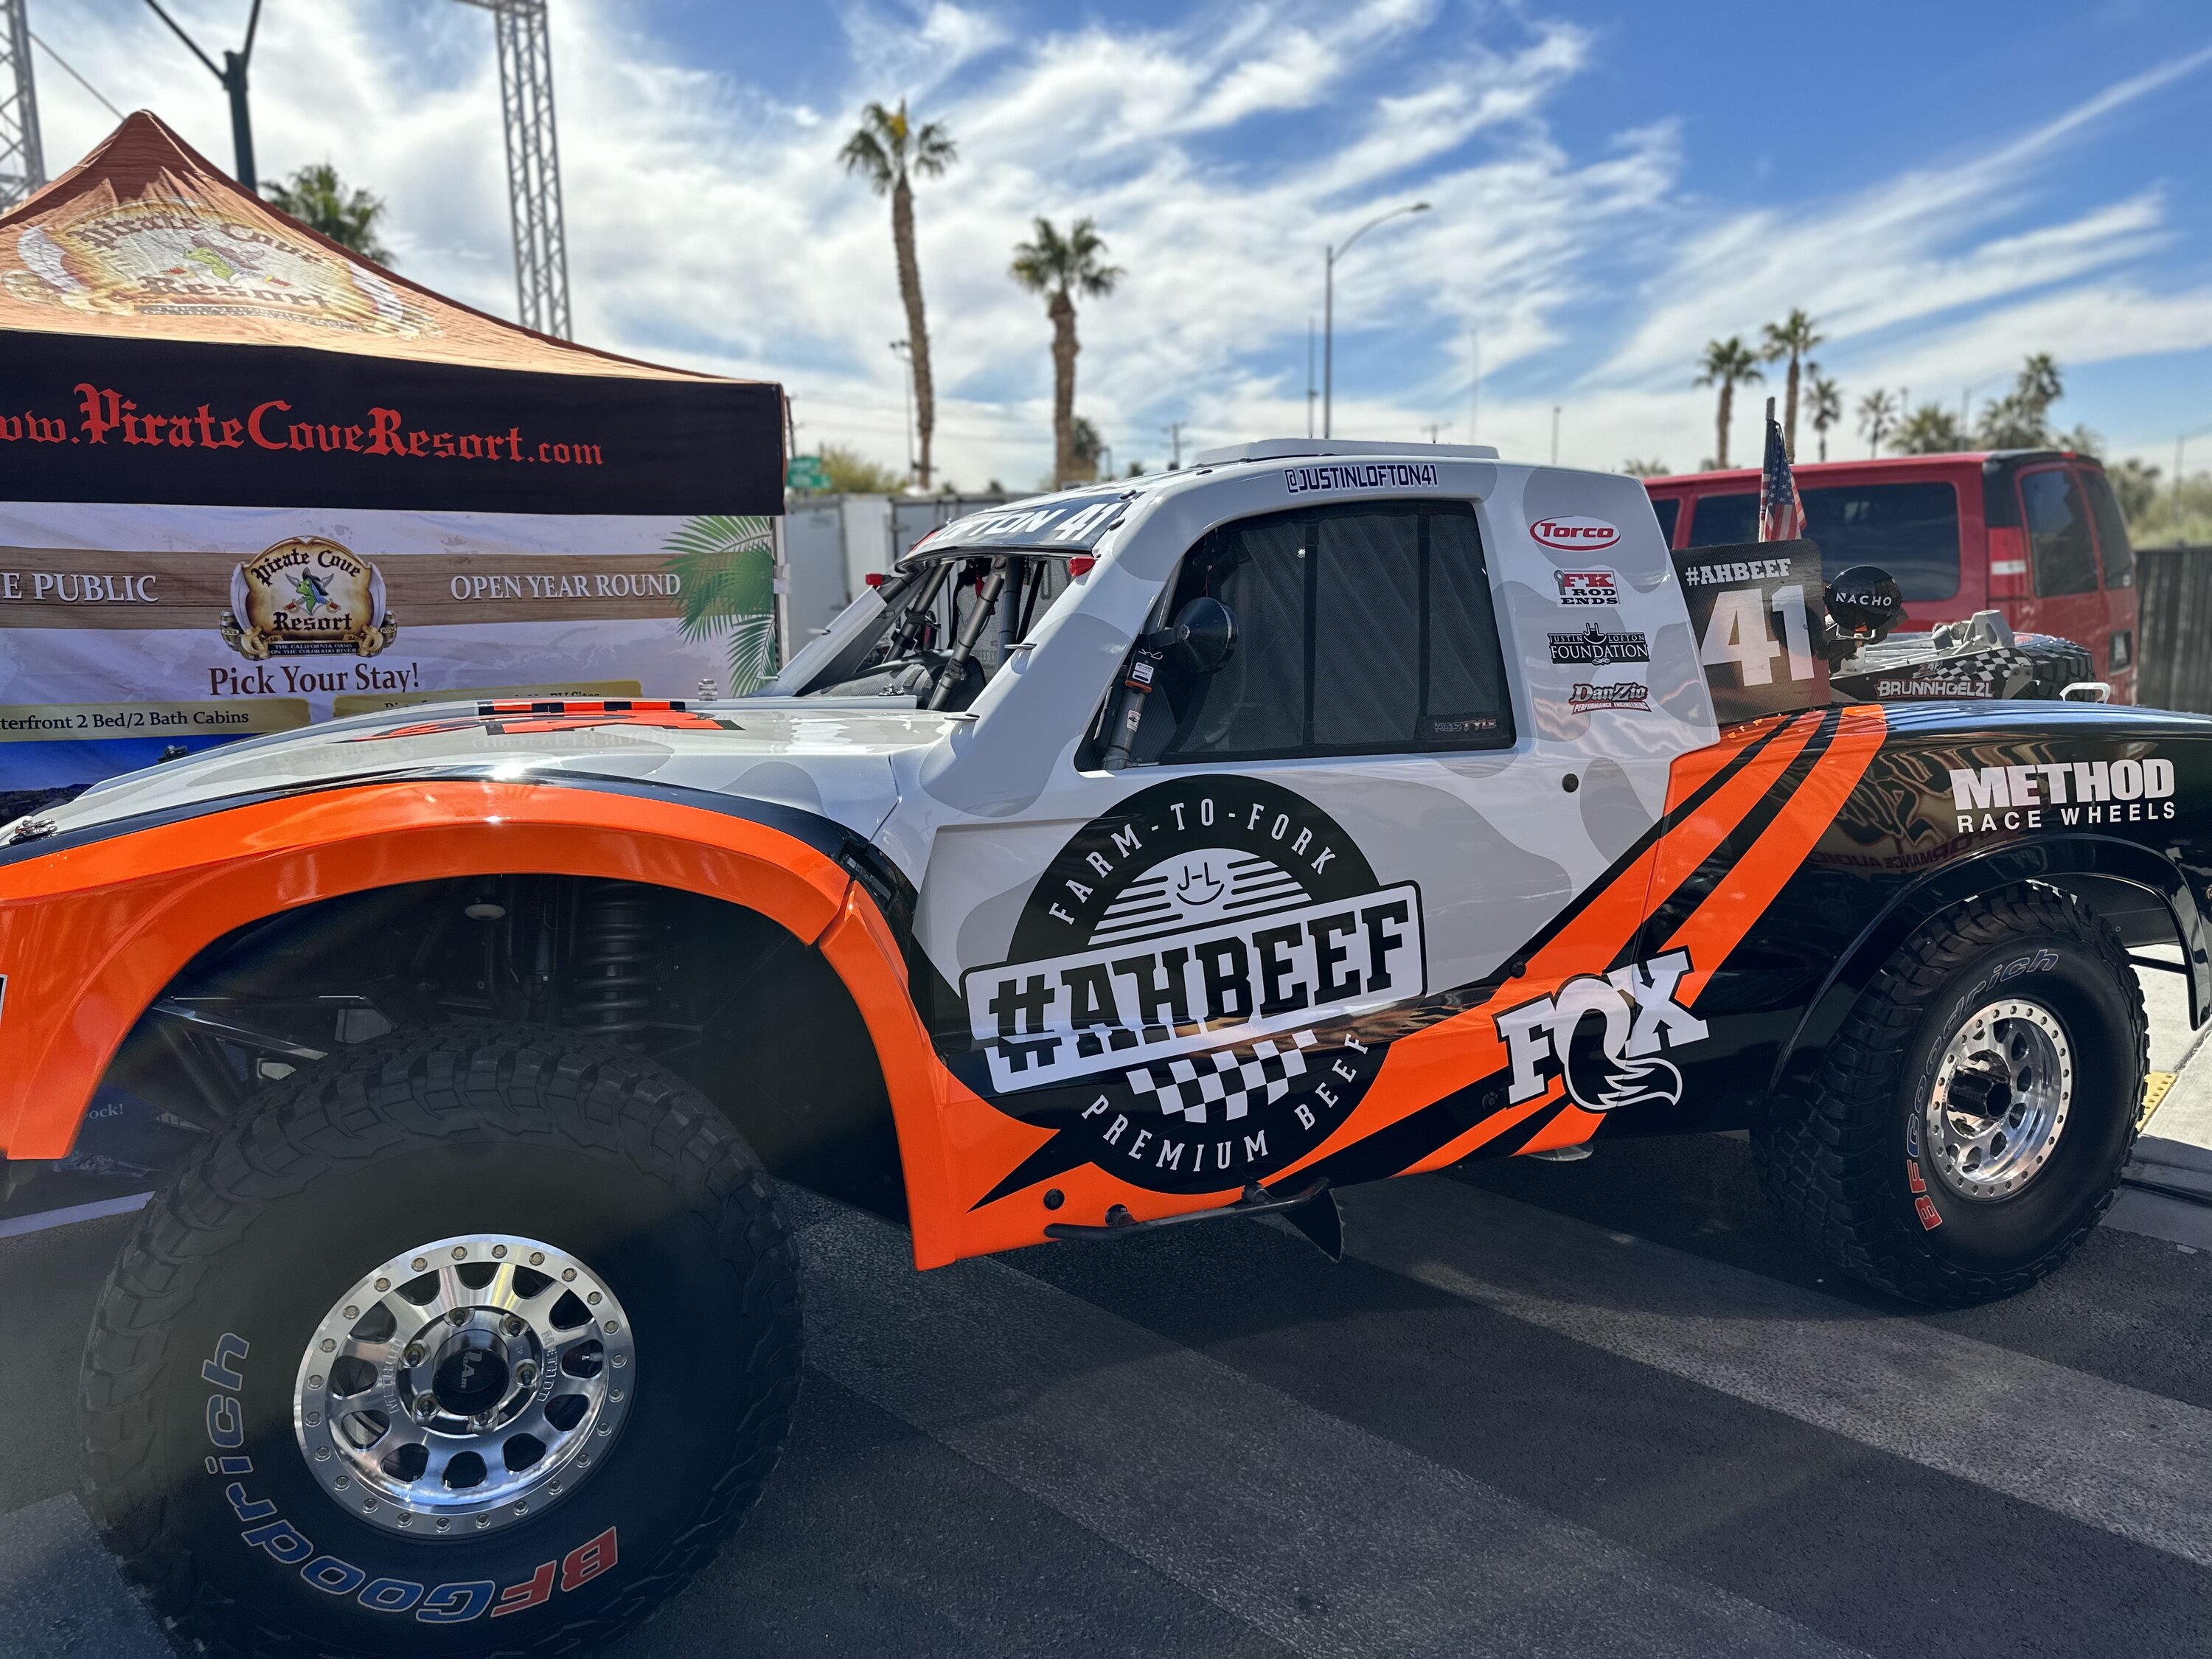 Ford Bronco Pics from 2023 Mint 400 (The Great American Off-Road Race) 2DC78222-9987-49CC-98FB-C72D4614CDAB